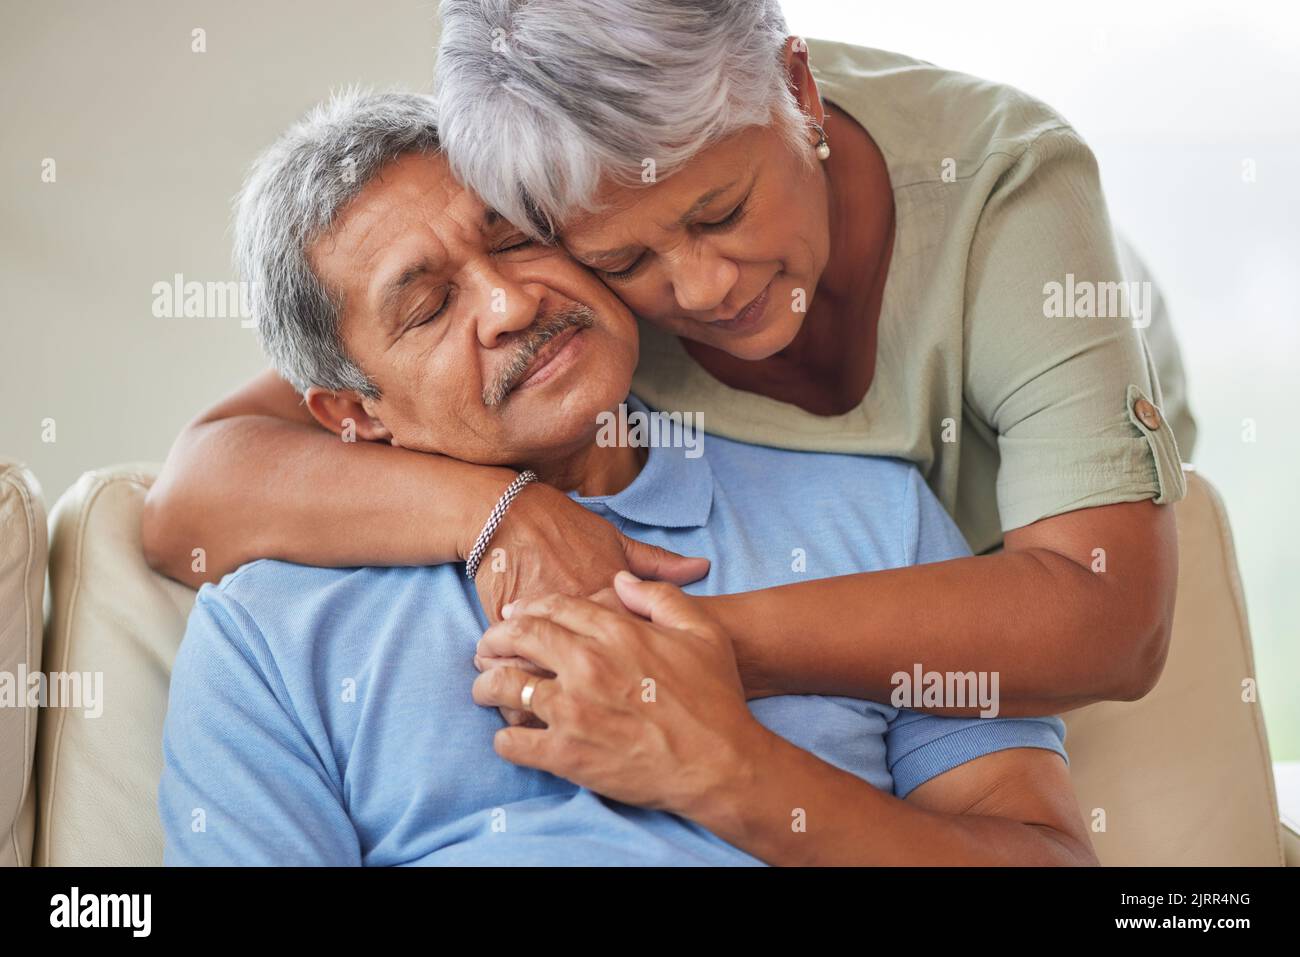 Sad or unhappy senior couple hug, comfort or support in a living room at home. Elderly husband suffering from depression problem after retirement Stock Photo